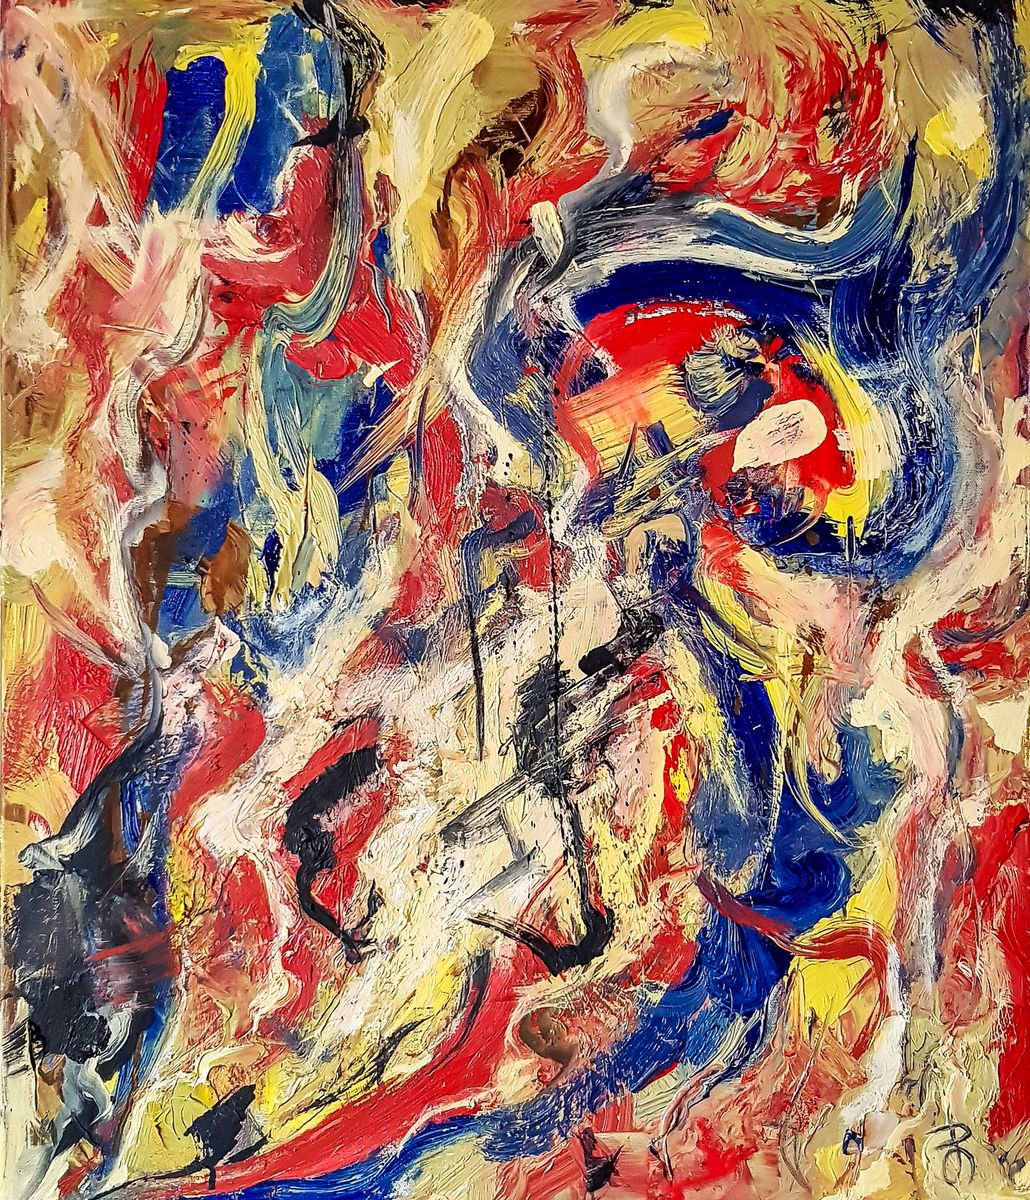  - Substitution- Action Painting in THE style OF Willem DE Kooning by Retne by Retne